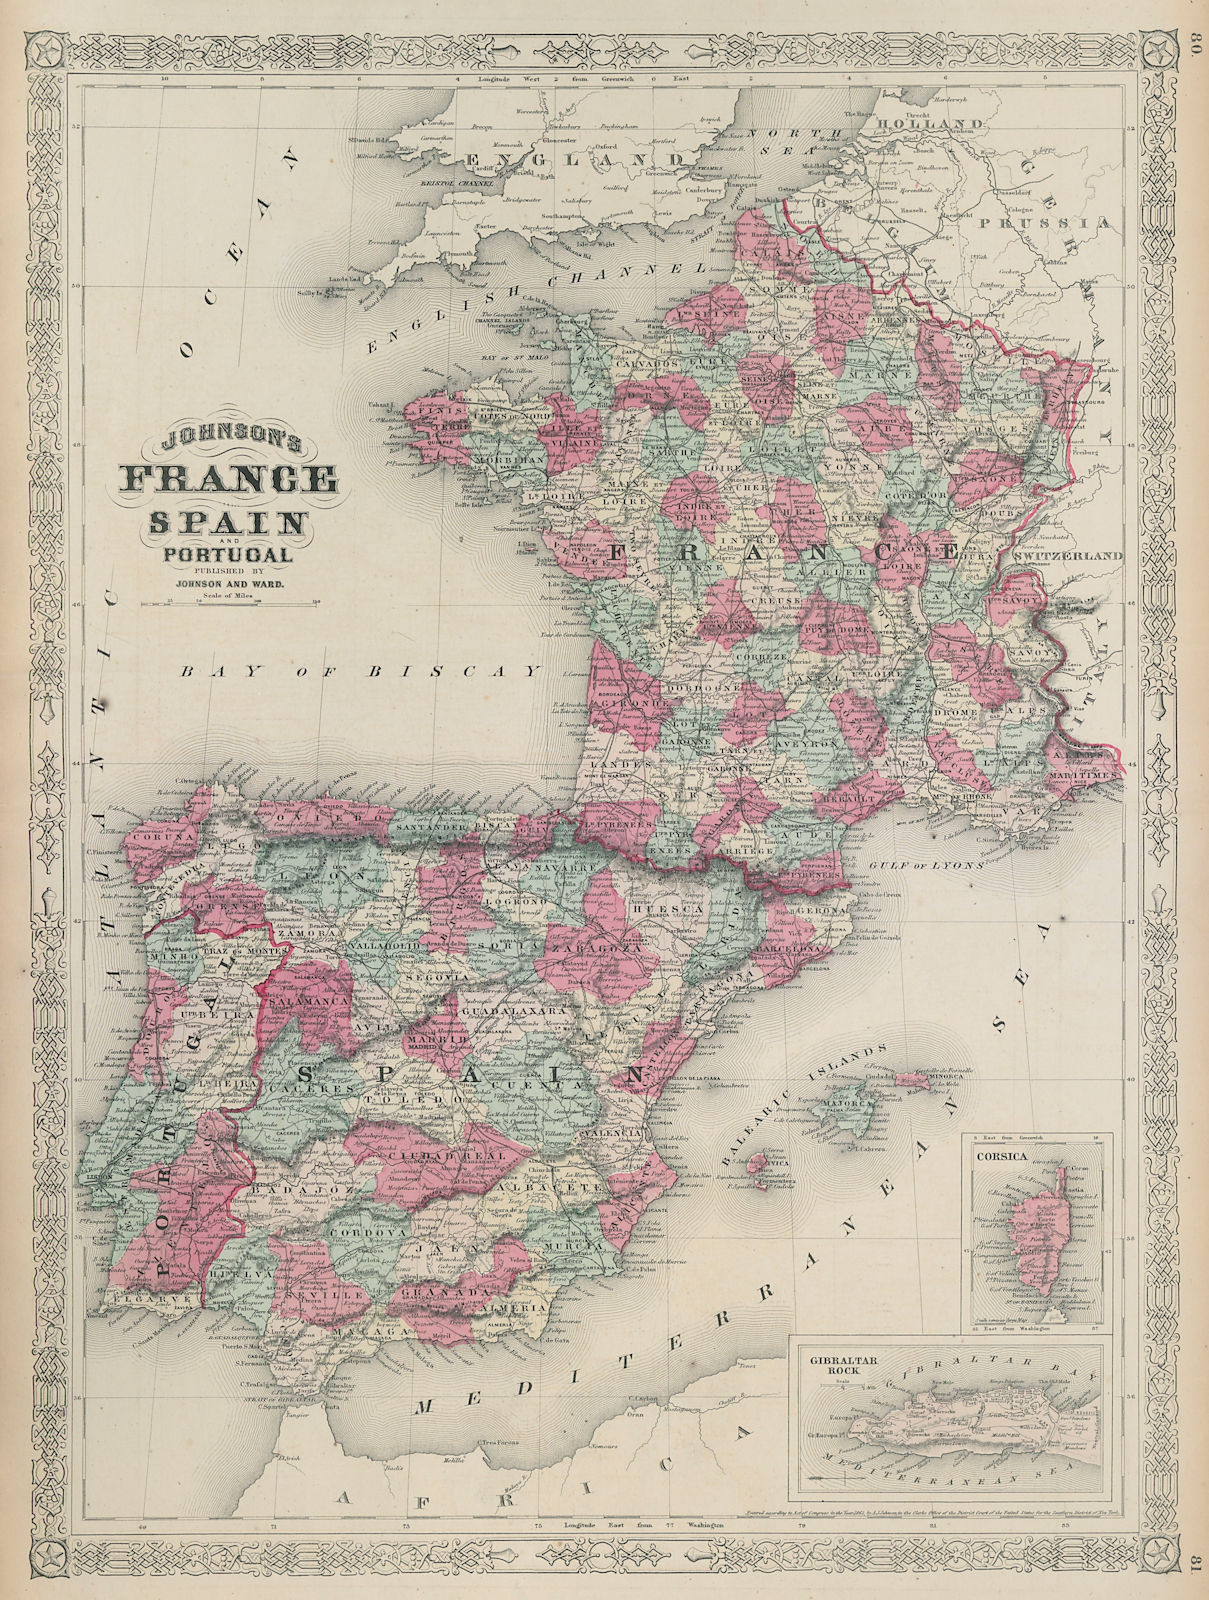 Johnson's France, Spain and Portugal. Corsica Gibraltar Iberia 1865 old map